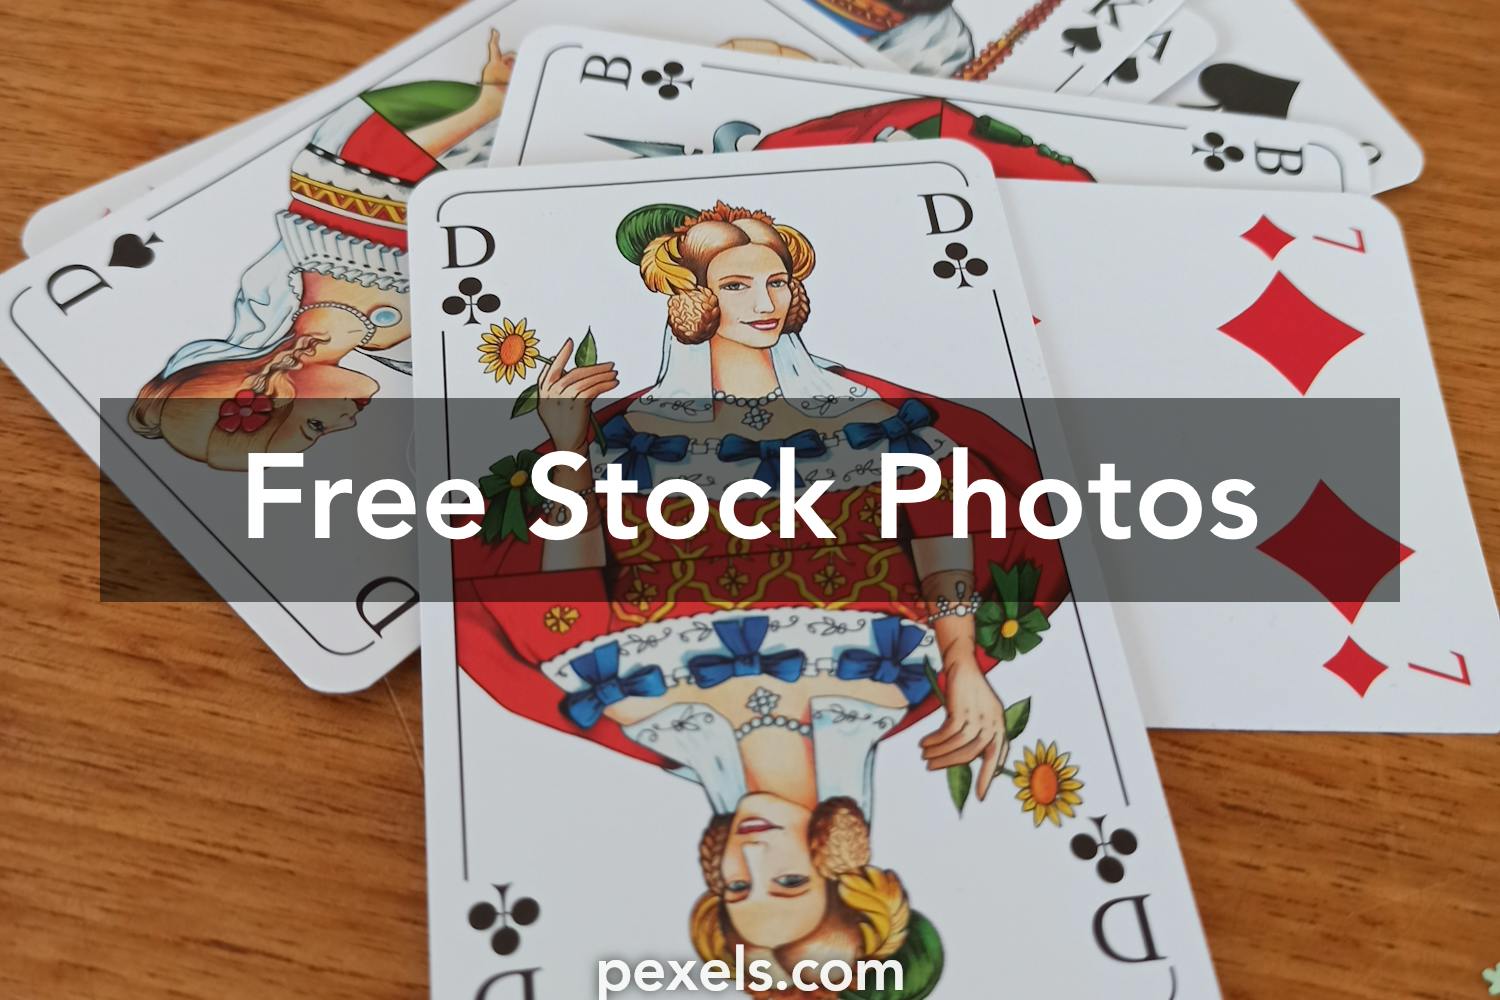 7 Of Spades 2 Of Diamonds Photos, Download The BEST Free 7 Of Spades 2 ...